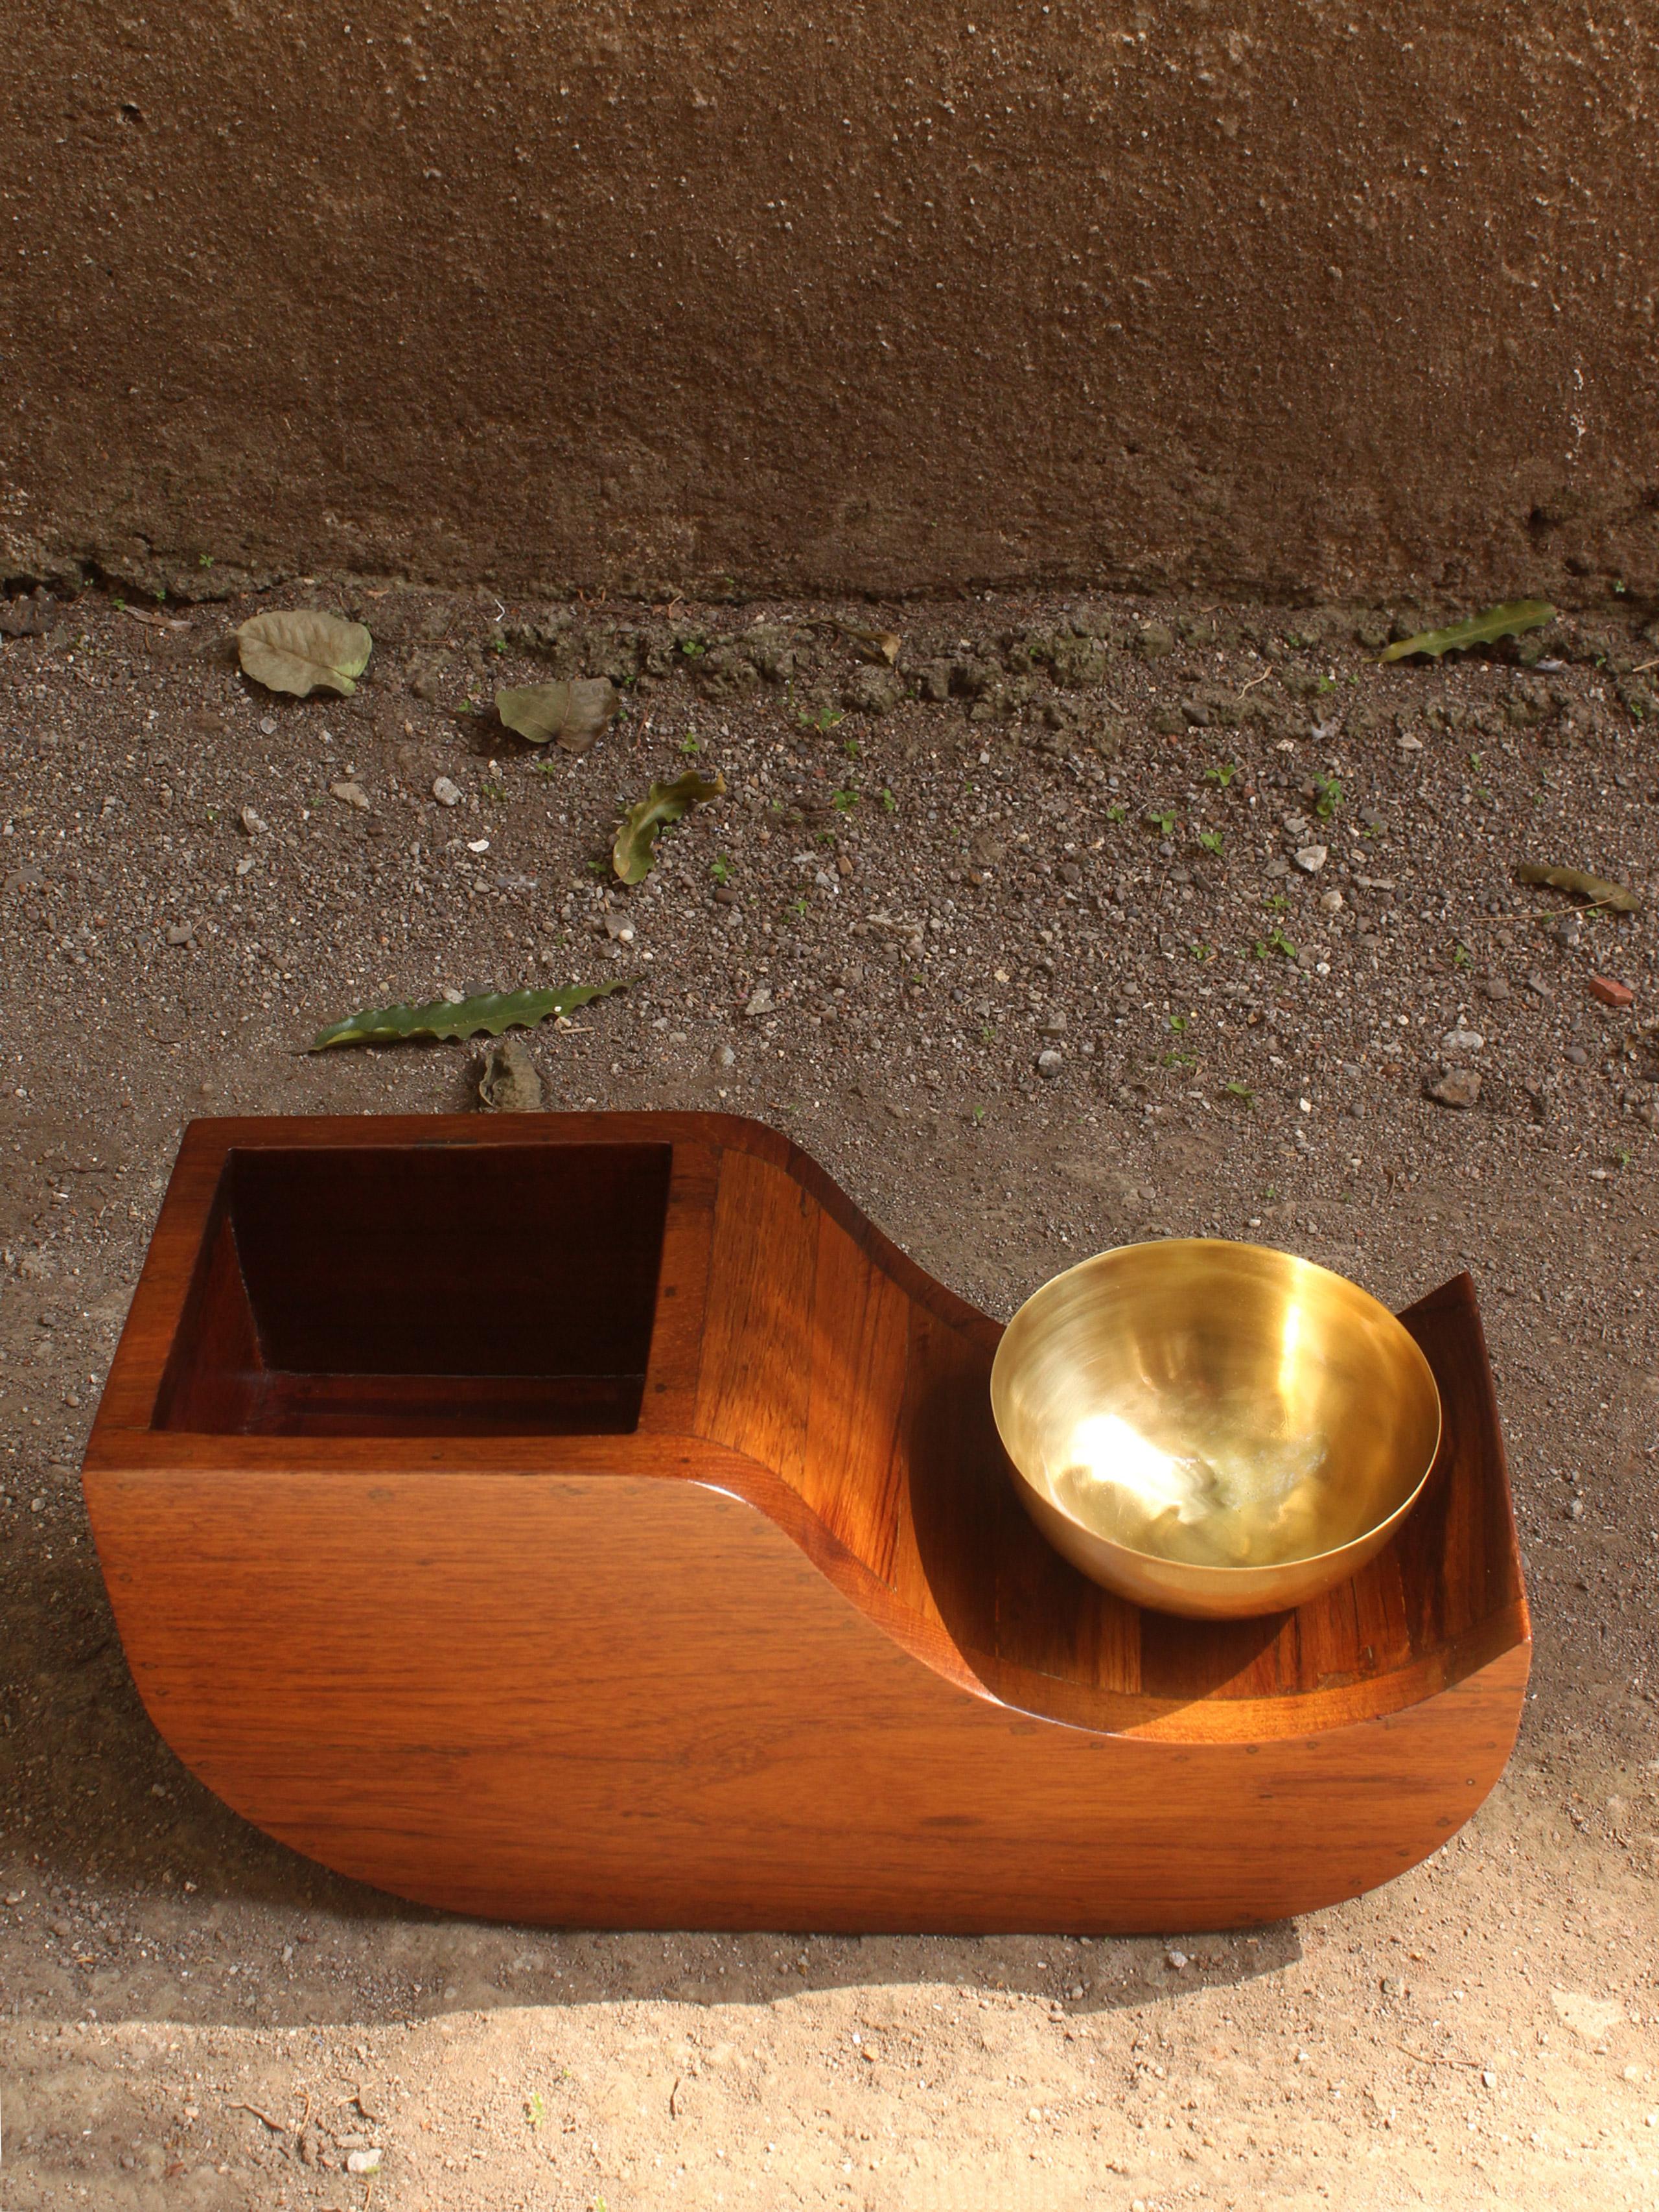 Dvi Planter by Studio Indigene
Dimensions: D 45.72 x W 17.78 x H 22,86 cm
Materials: Teak Wood & Brass. 
Colors Brown, Natural Wooden, Brass Finish.

Dvi, holds two plantlings in its graceful handcrafted form. The plants are housed in the wooden